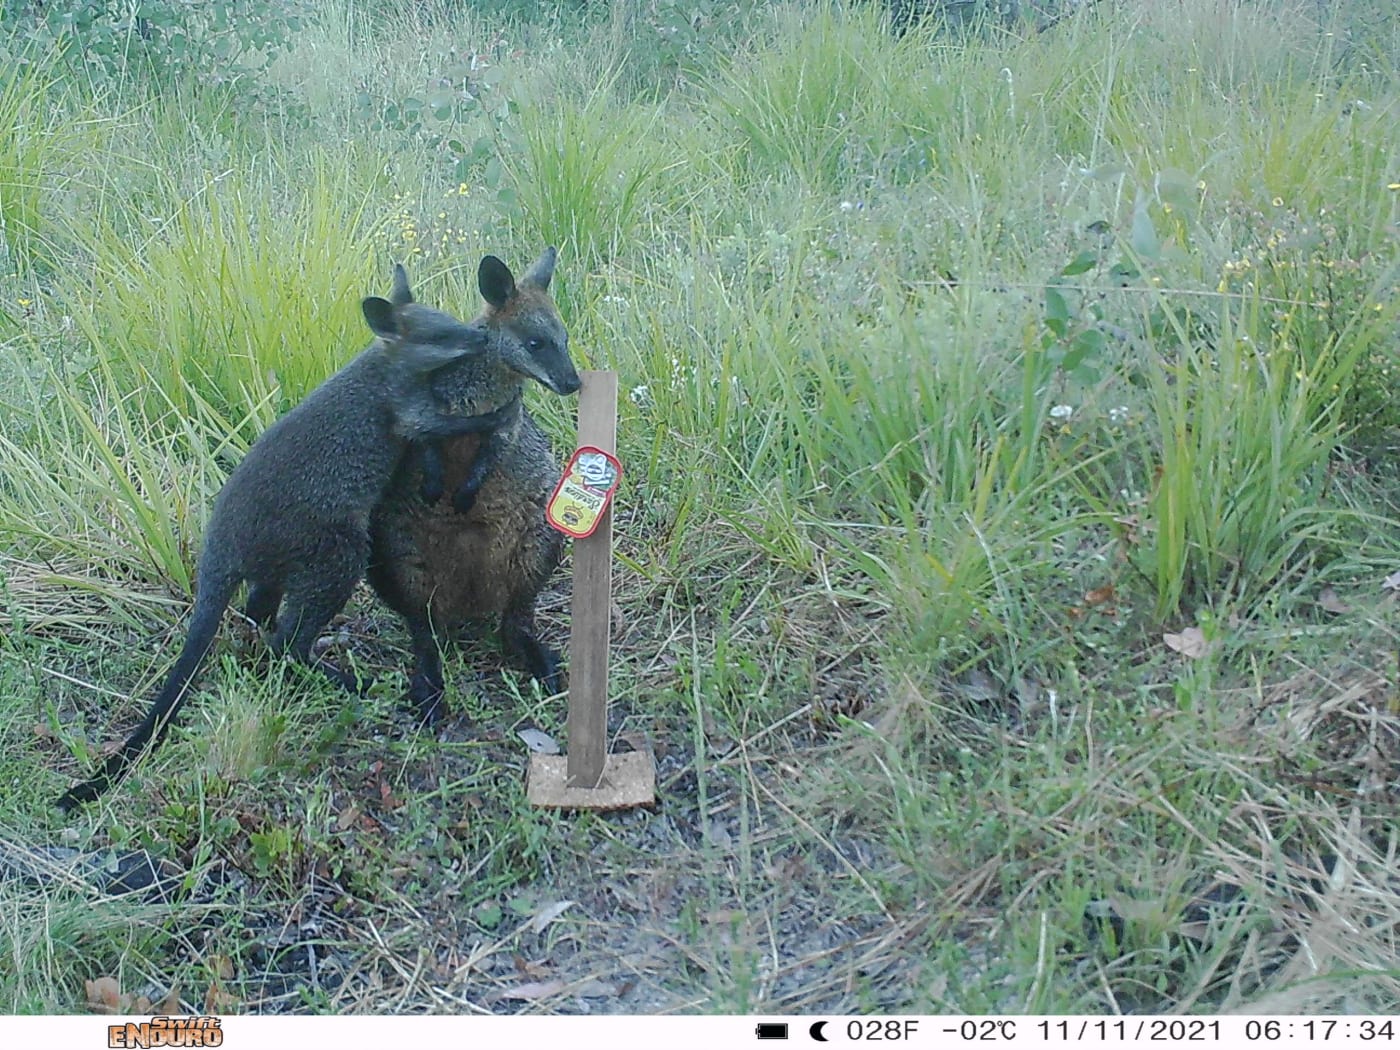 A sensor camera photo of swamp wallabies taken in the NSW Southern Ranges as part of the Eyes on Recovery project.

Eyes on Recovery is a large-scale sensor camera project. and a collaboration between WWF, Conservation International, and local land managers and research organisations. Google-powered AI technology has been trained to identify Australian animals in photos to track the recovery of threatened species following the 2019-20 bushfires.
Eyes on Recovery is a large-scale sensor camera project. and a collaboration between WWF, Conservation International, and local land managers and research organisations. Google-powered AI technology has been trained to identify Australian animals in photos to track the recovery of threatened species following the 2019-20 bushfires.